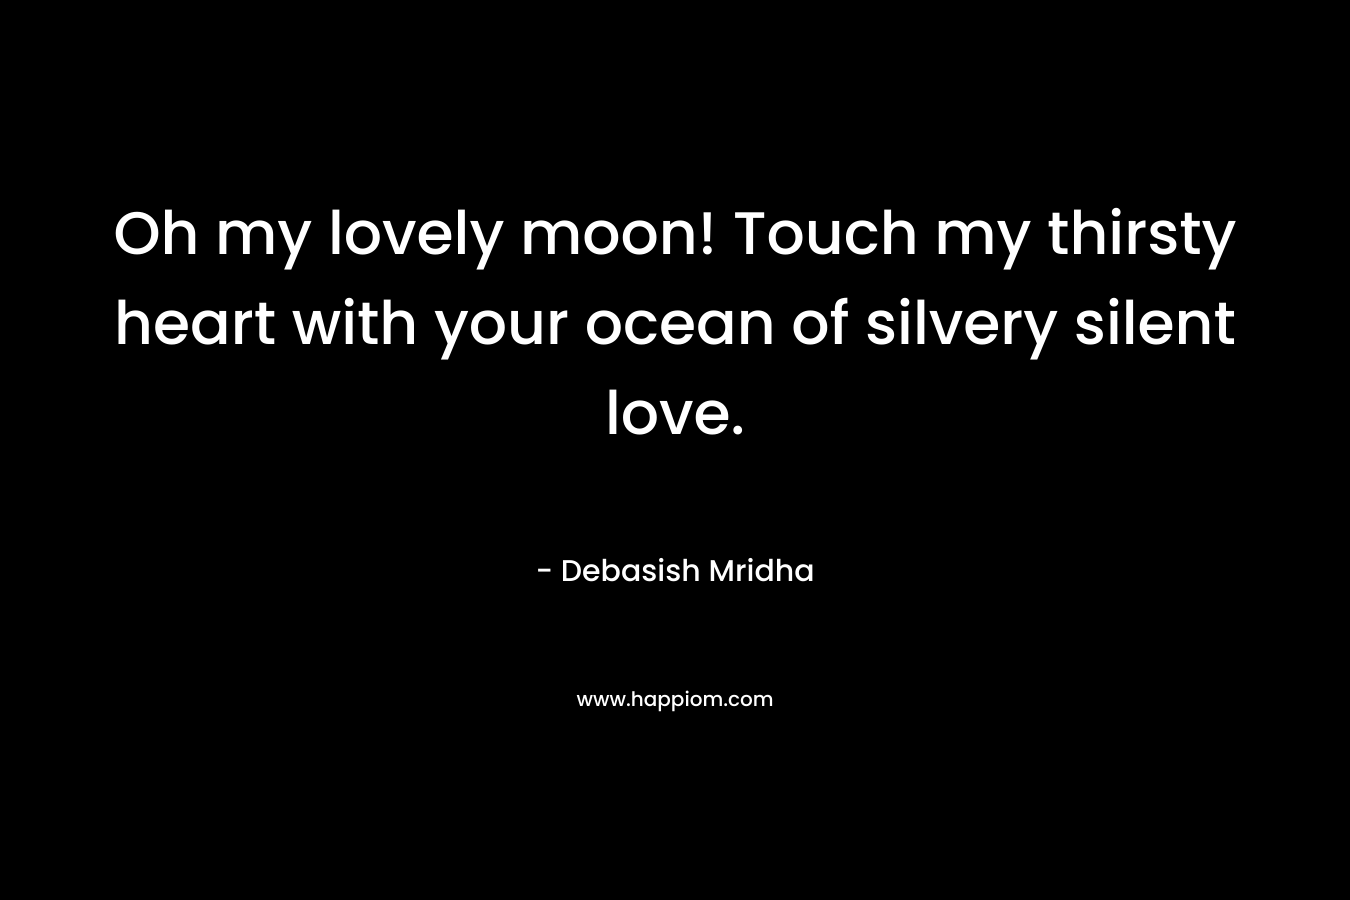 Oh my lovely moon! Touch my thirsty heart with your ocean of silvery silent love. – Debasish Mridha